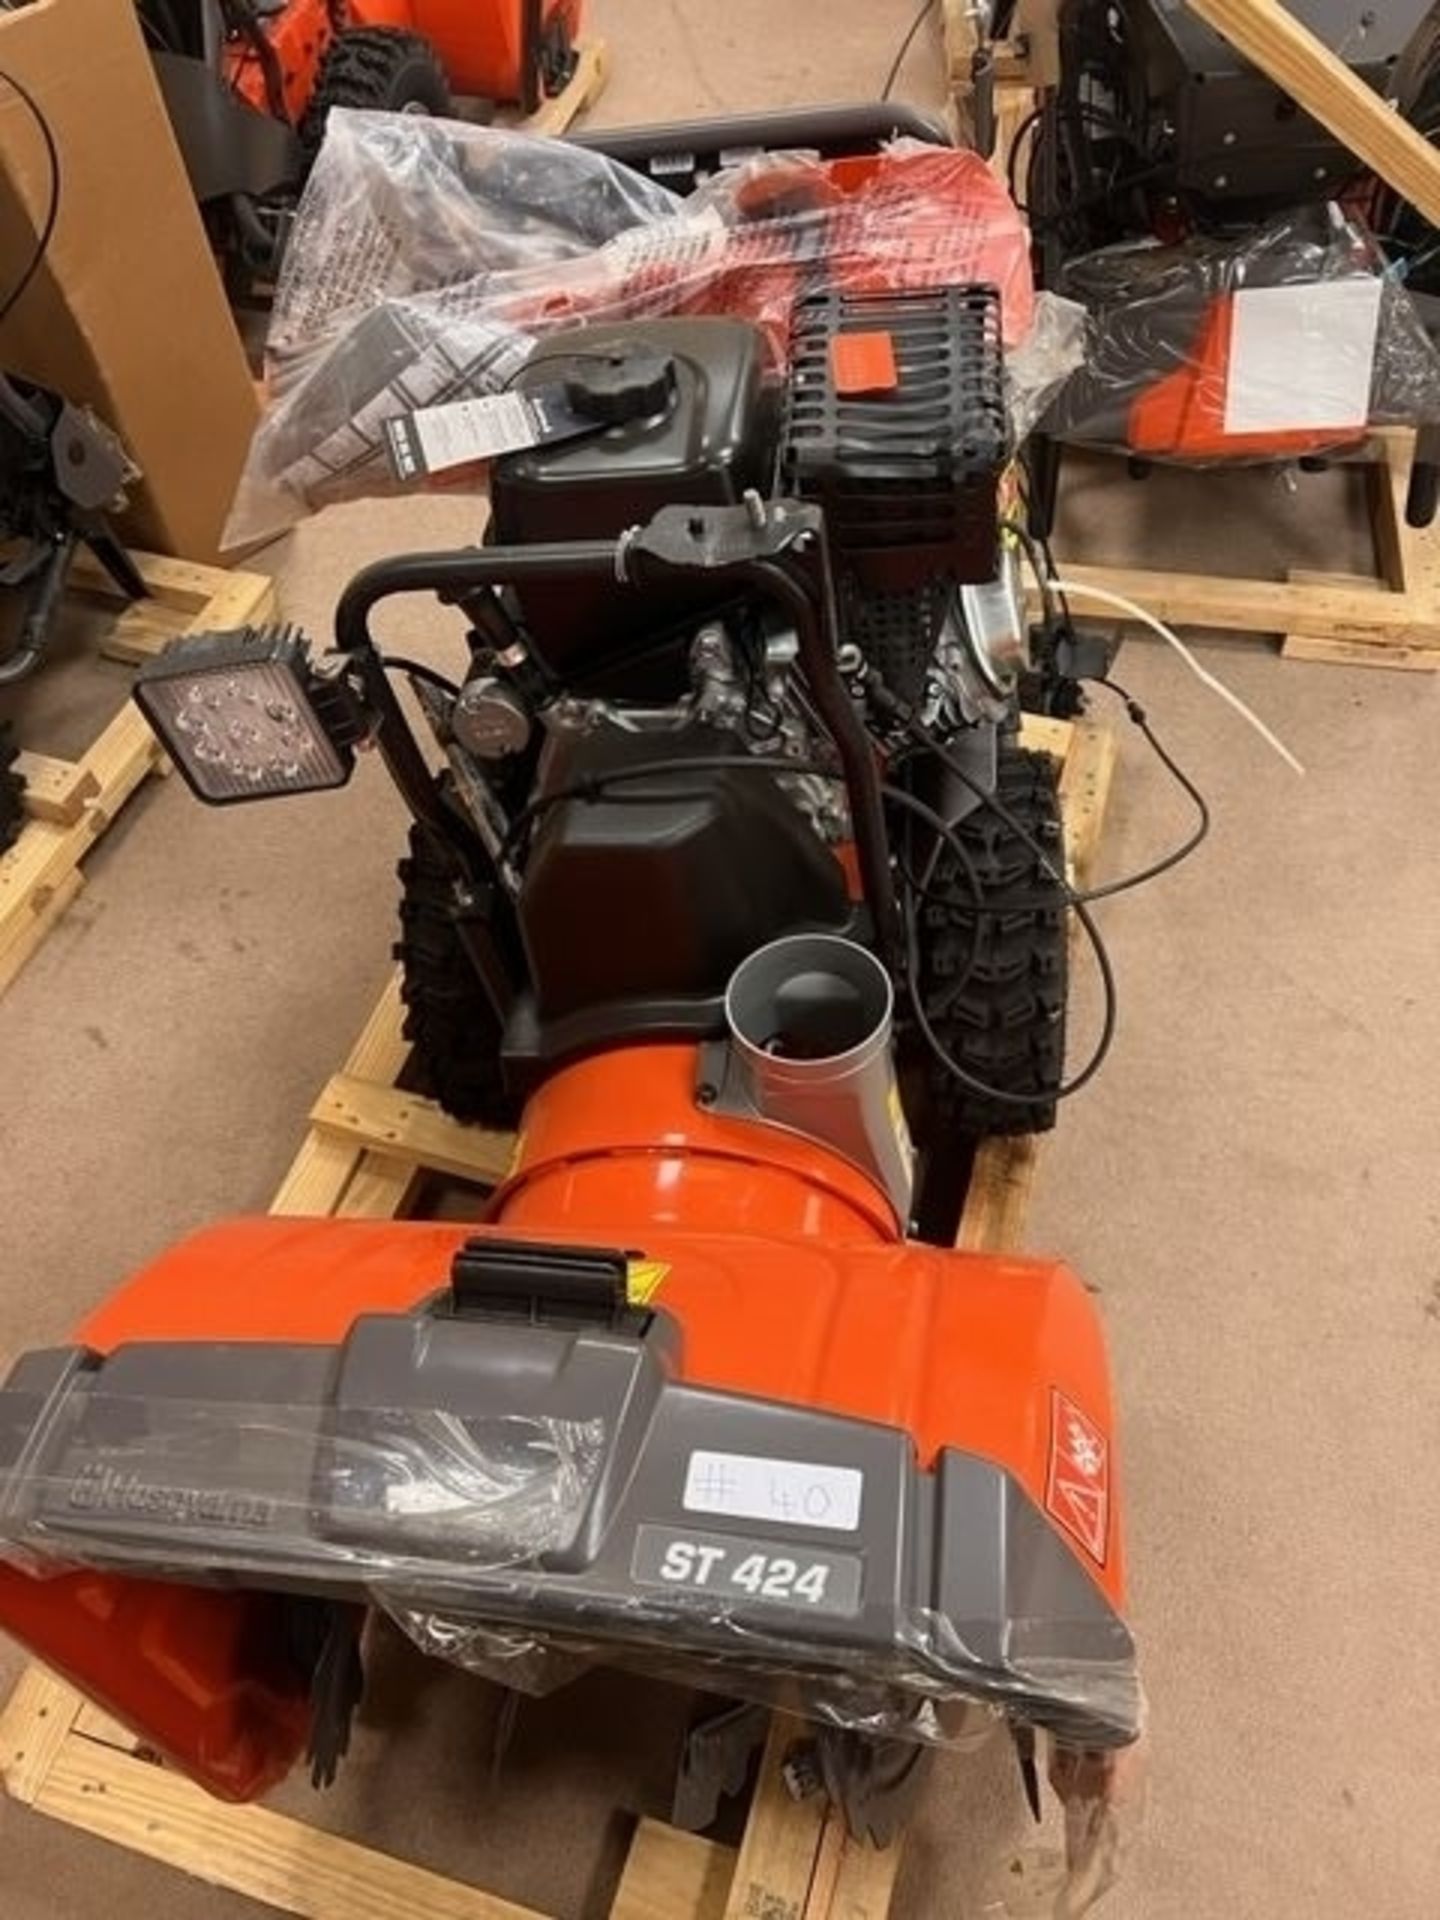 Husqvarna ST 424 Self Propelled Snow Blower - Approx. MSRP $2299 - Image 4 of 5